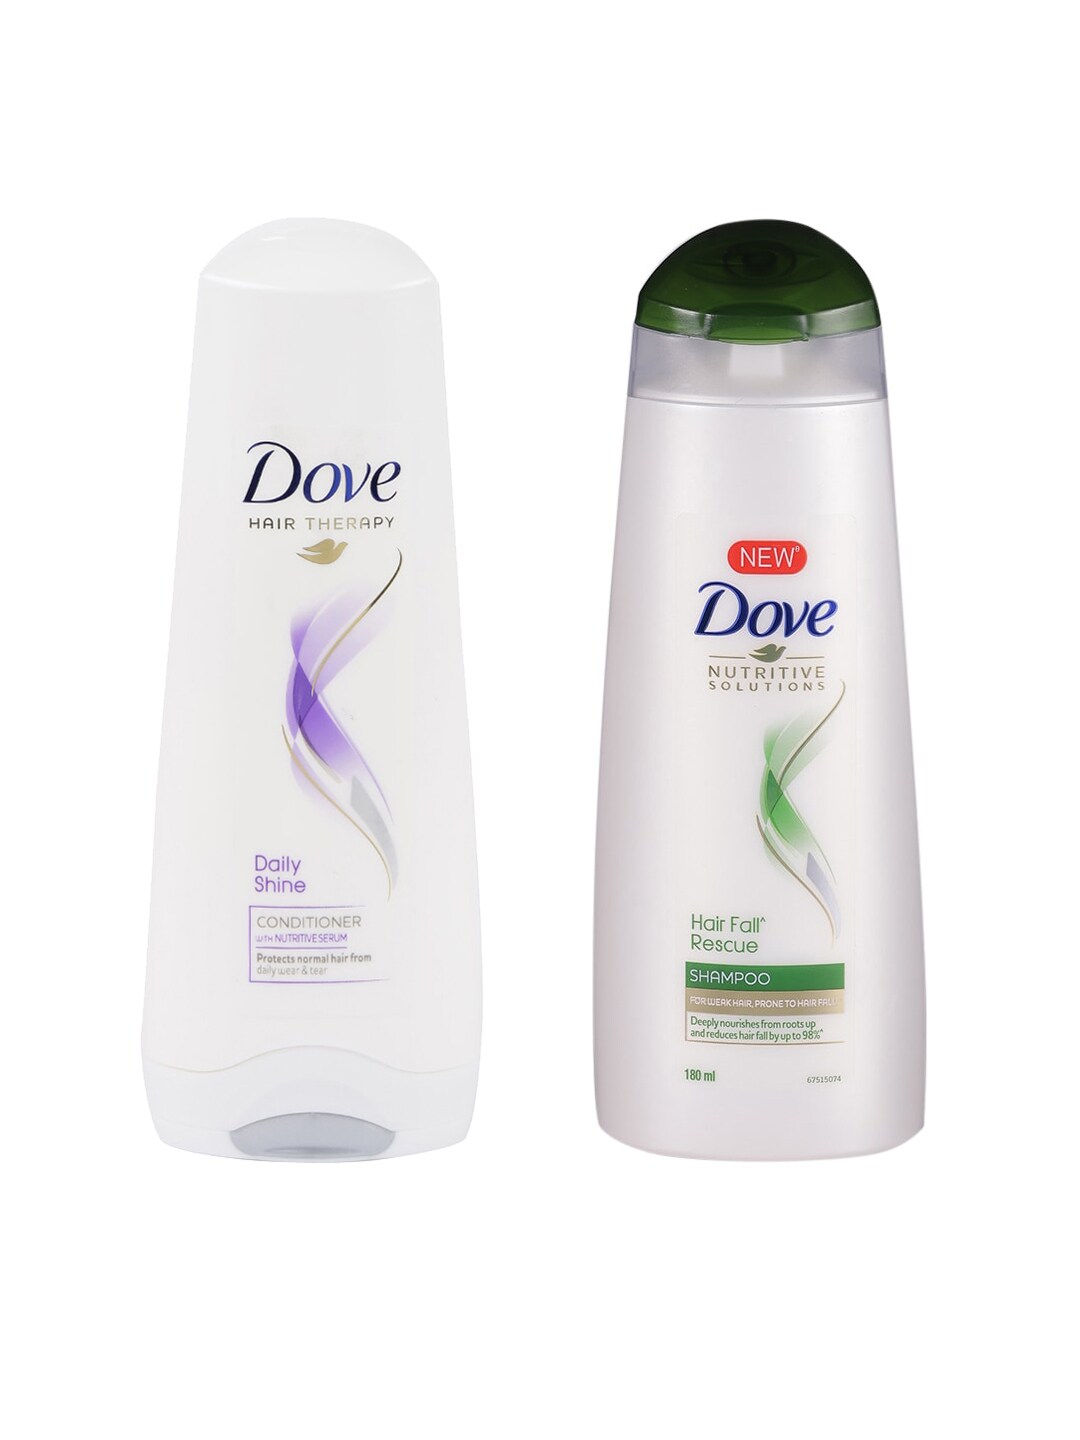 Dove Hair Therapy Daily Shine Conditioner & Unisex Hair Fall Rescue Shampoo Price in India